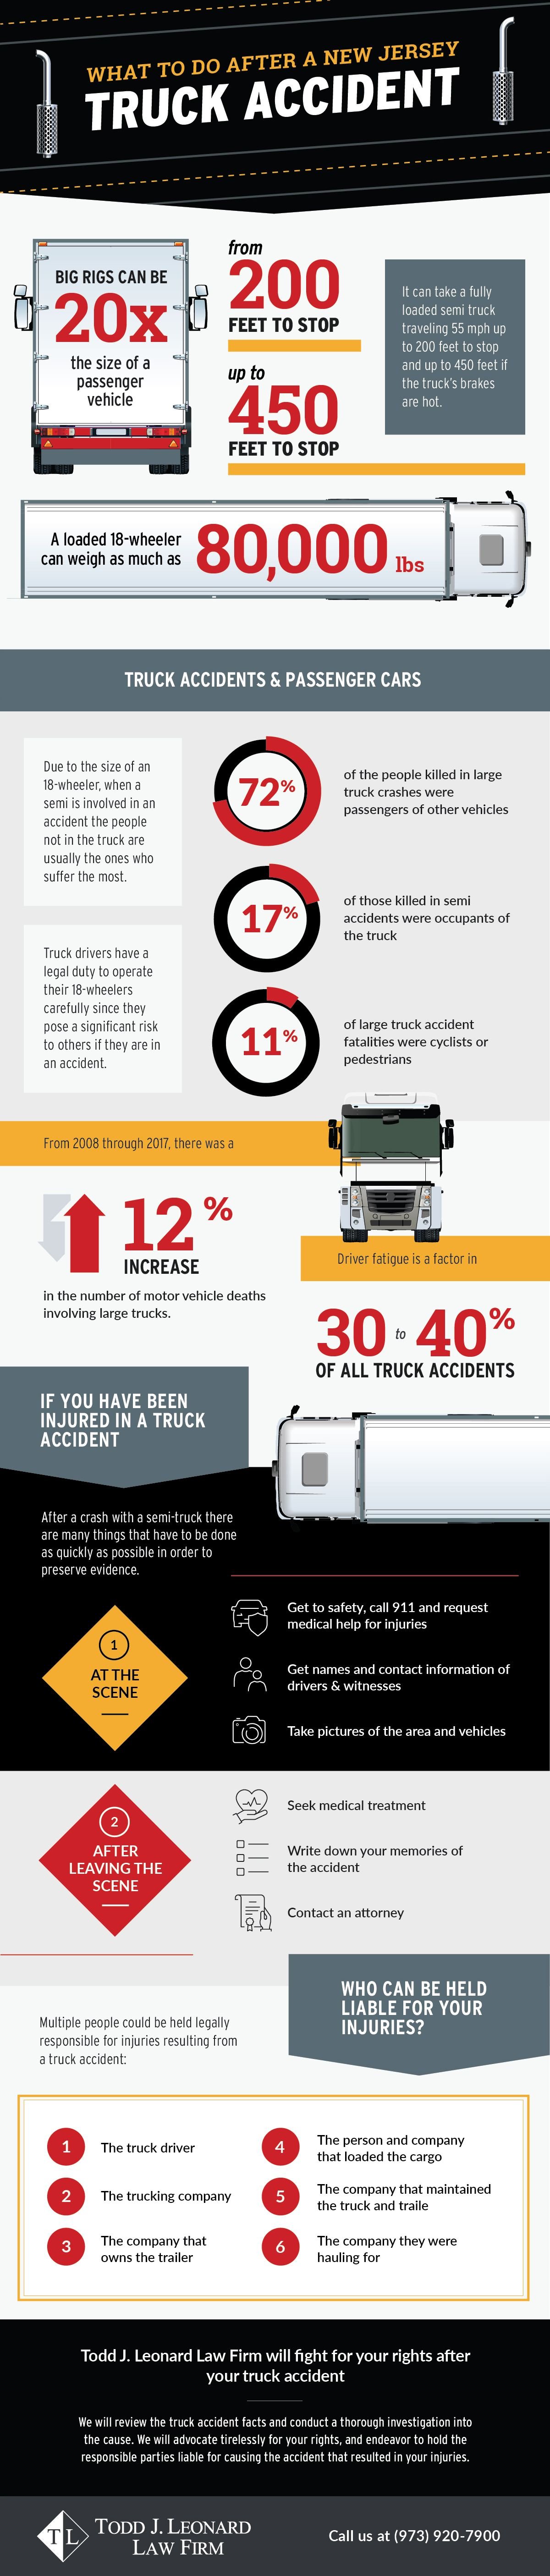 New Jersey Truck Accident Infographic